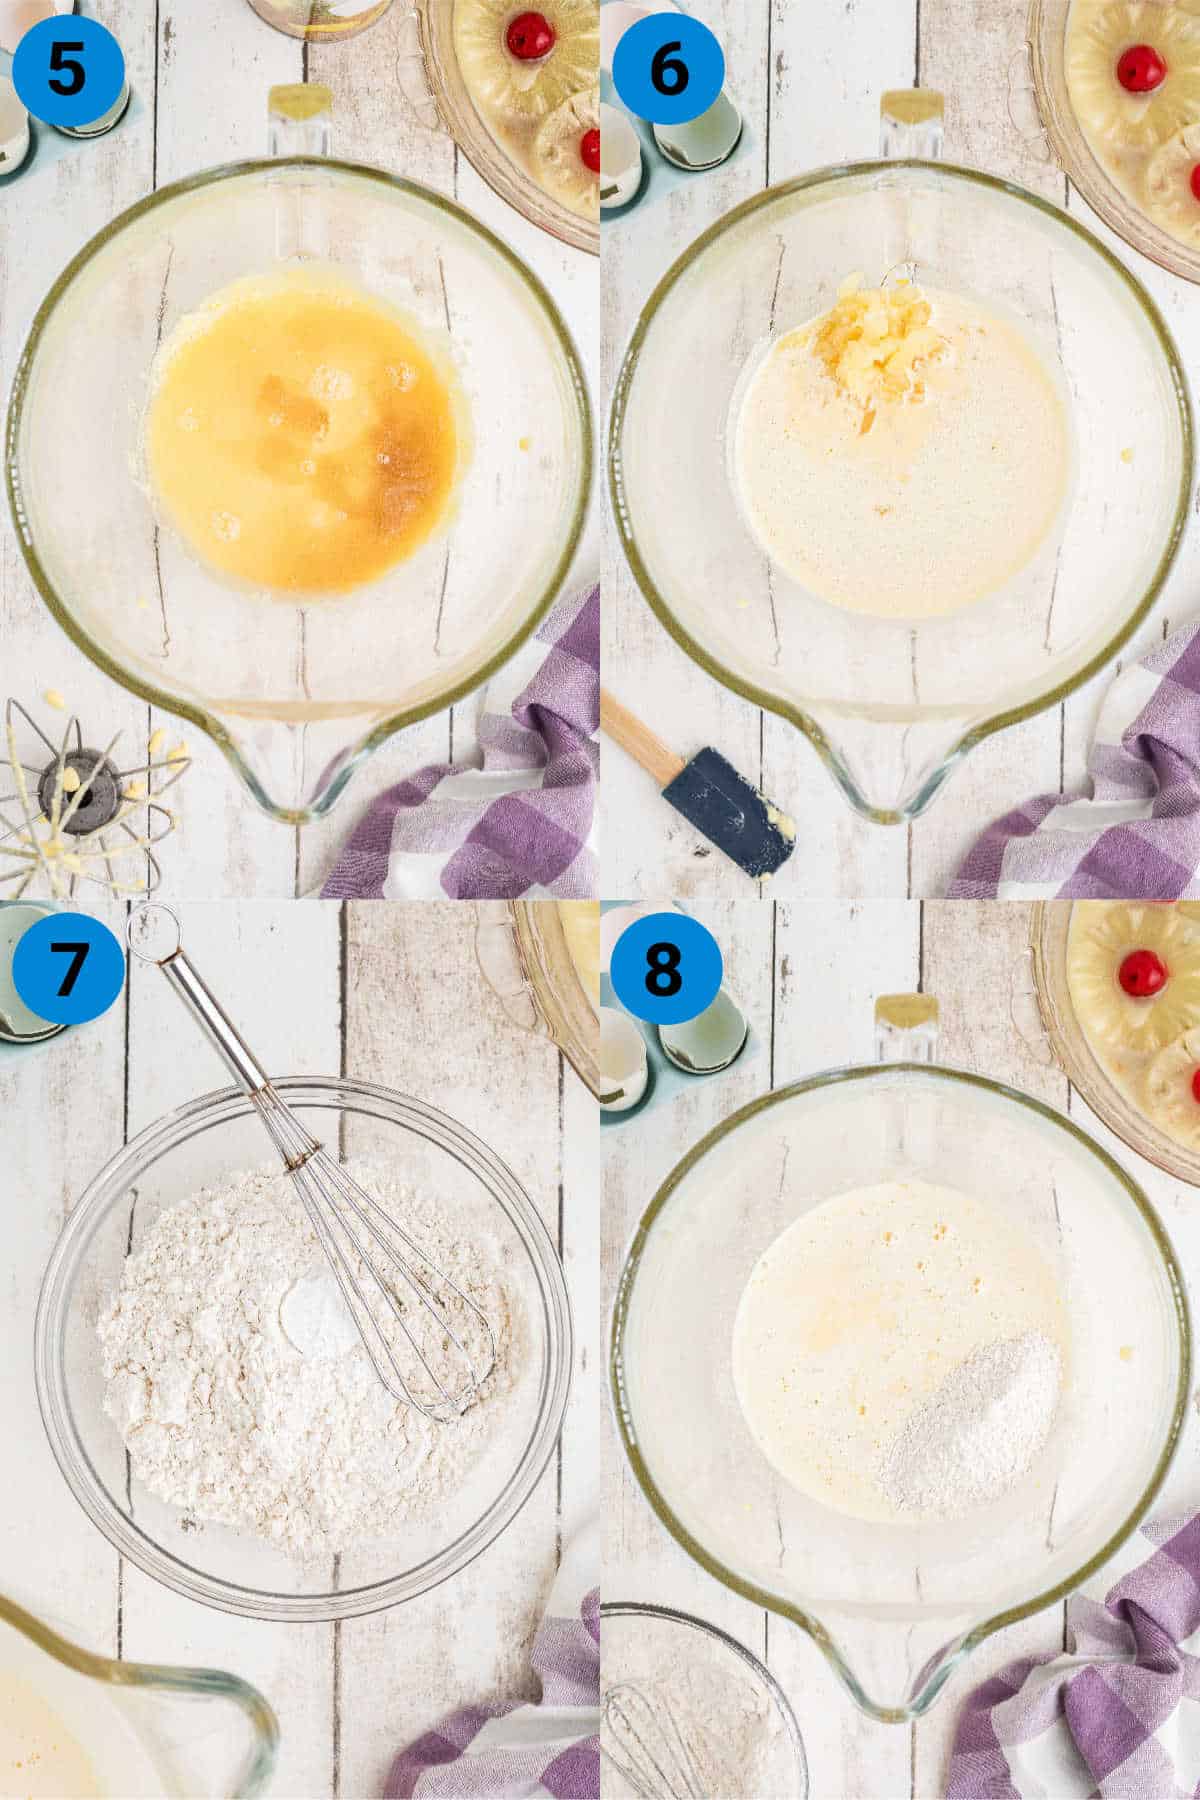 A collage of four images showing how to make a pineapple upside down cake recipe steps 5-8.